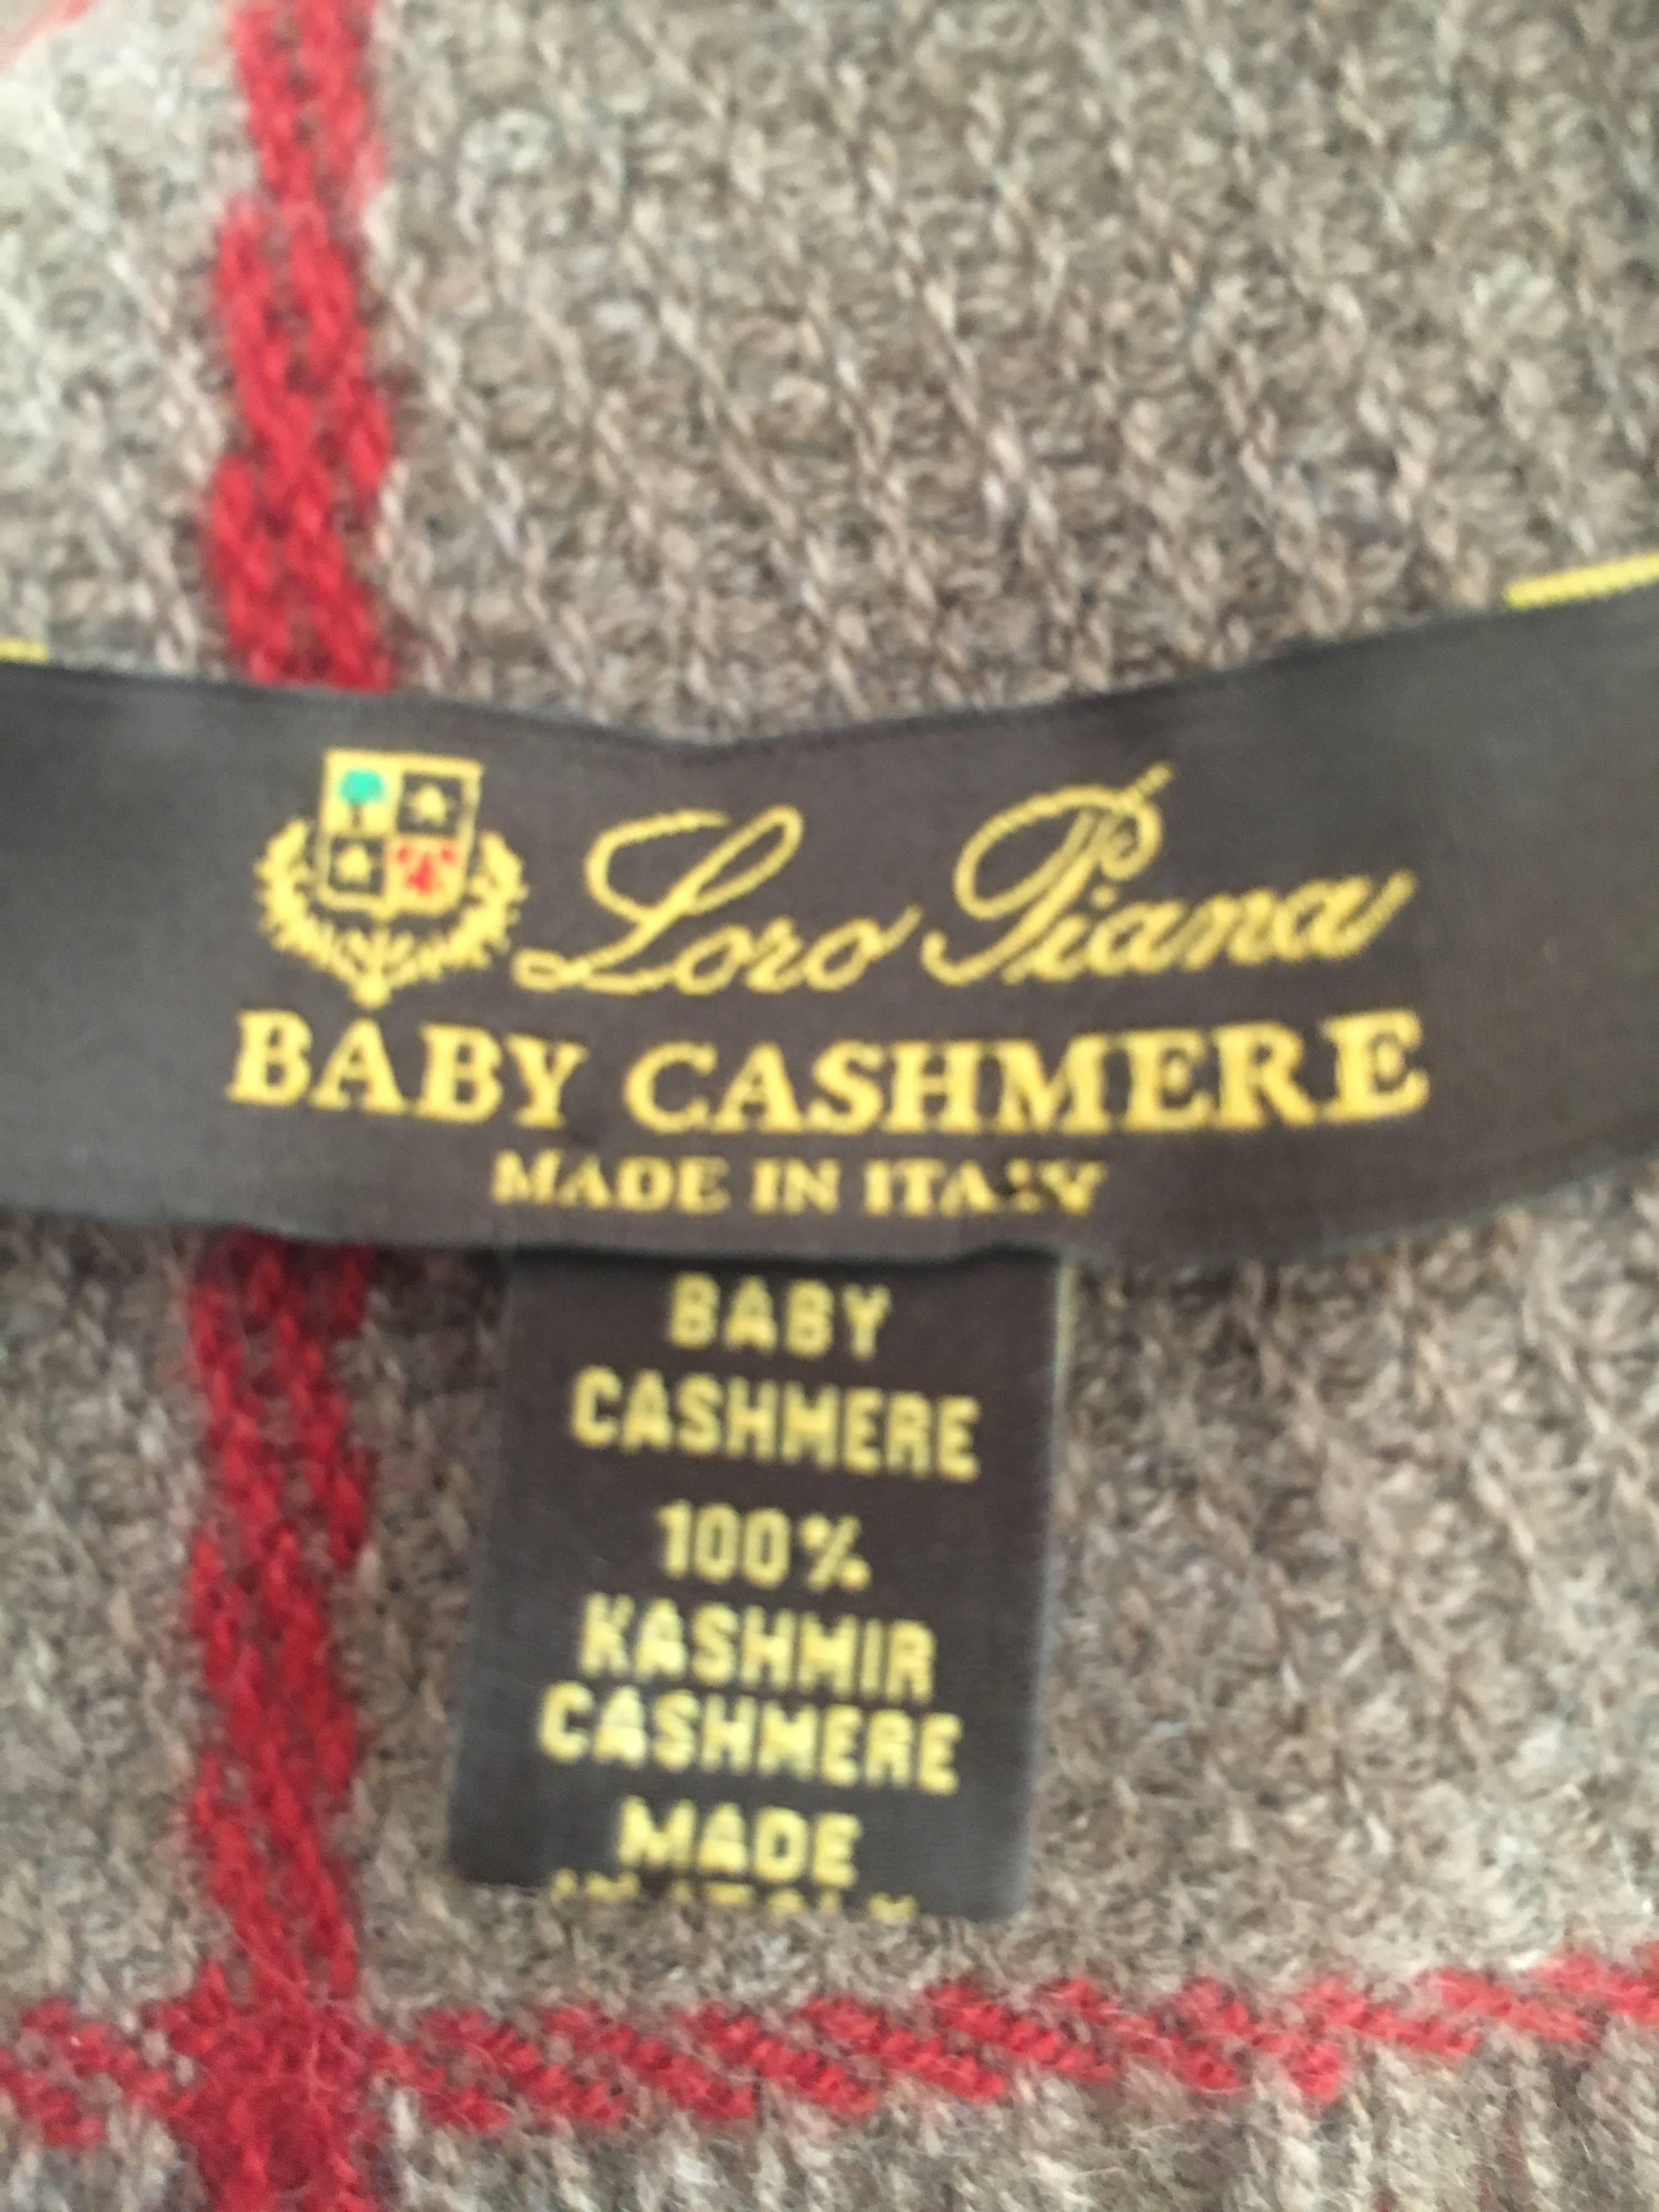 Super luxurious baby cashmere scarf or shawl from Loro Piana .
It is an oatmeal color with red check
17" x 76"
Excellent condition , minor pilling